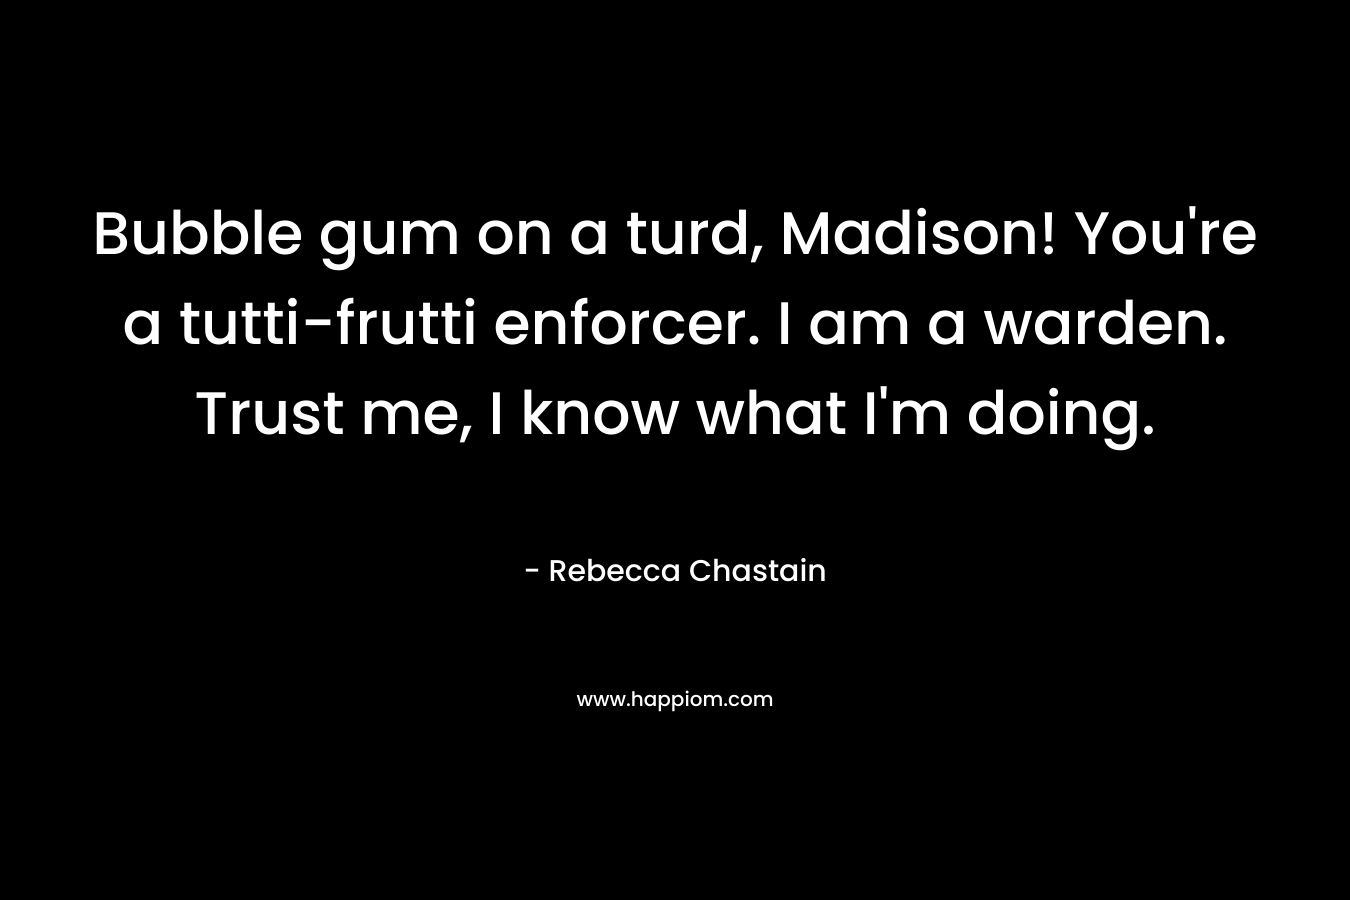 Bubble gum on a turd, Madison! You're a tutti-frutti enforcer. I am a warden. Trust me, I know what I'm doing.